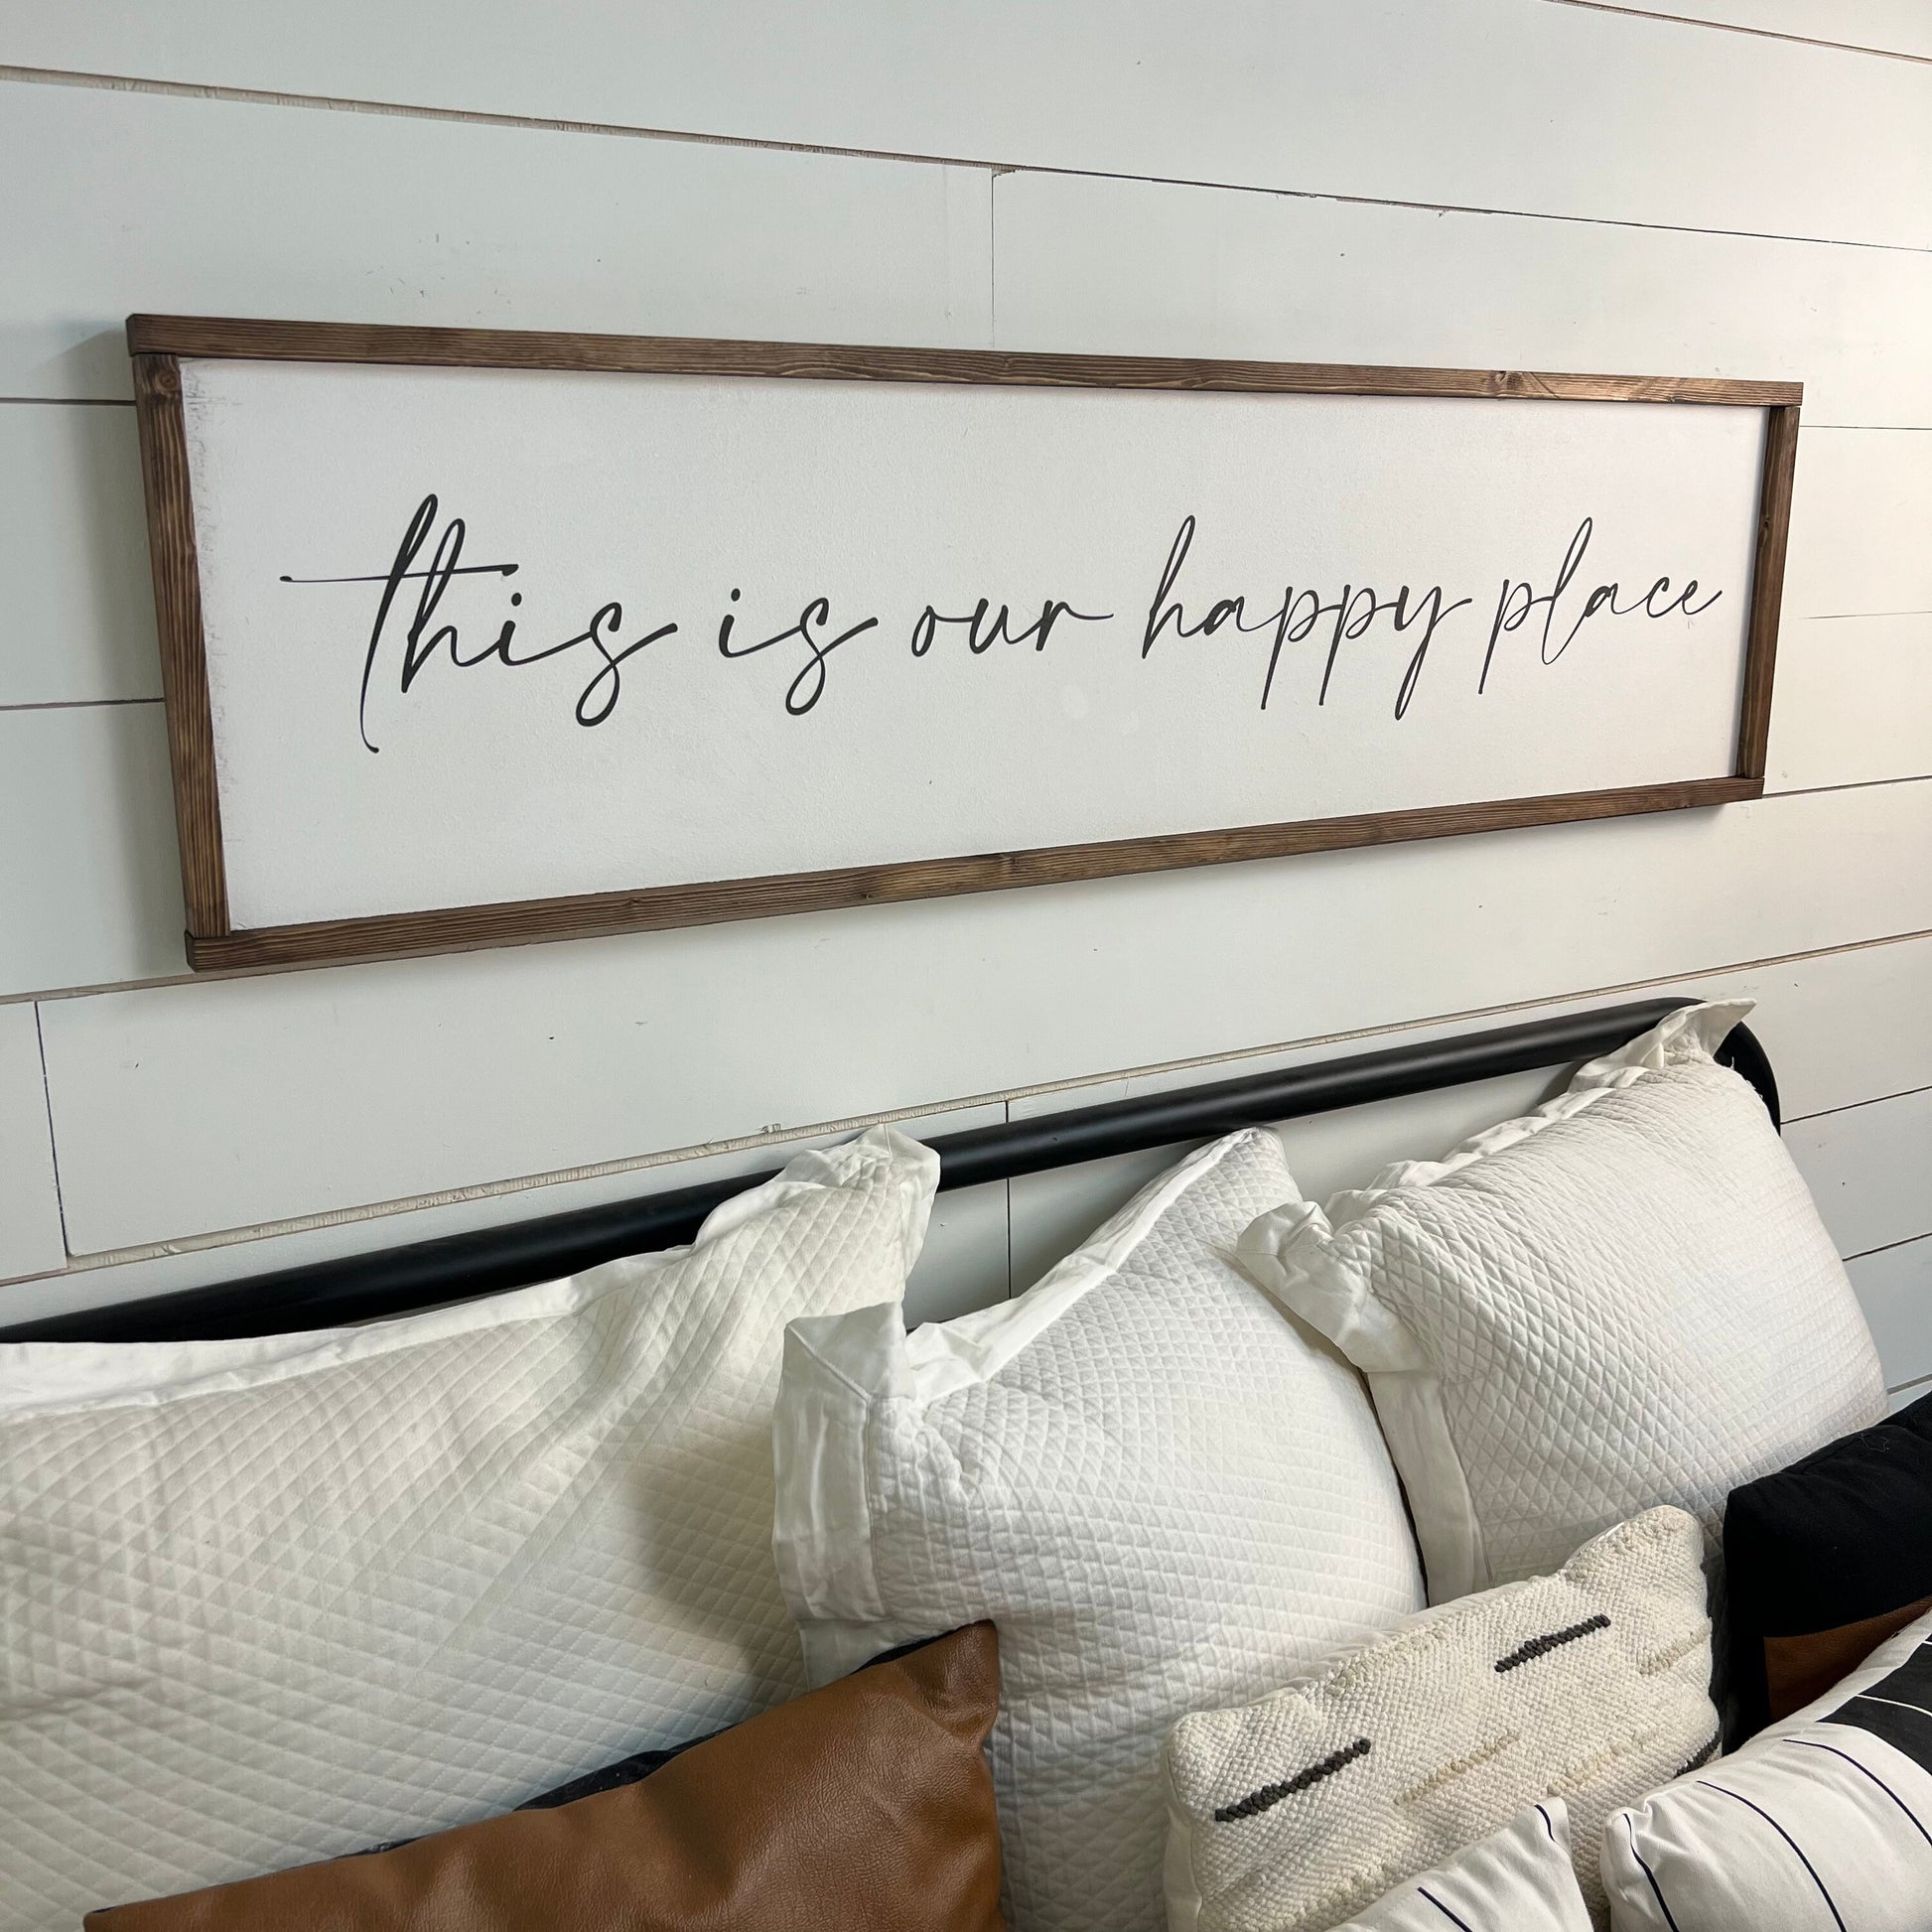 this is our happy place - above over the bed couch sign - master bedroom wall art [FREE SHIPPING!]